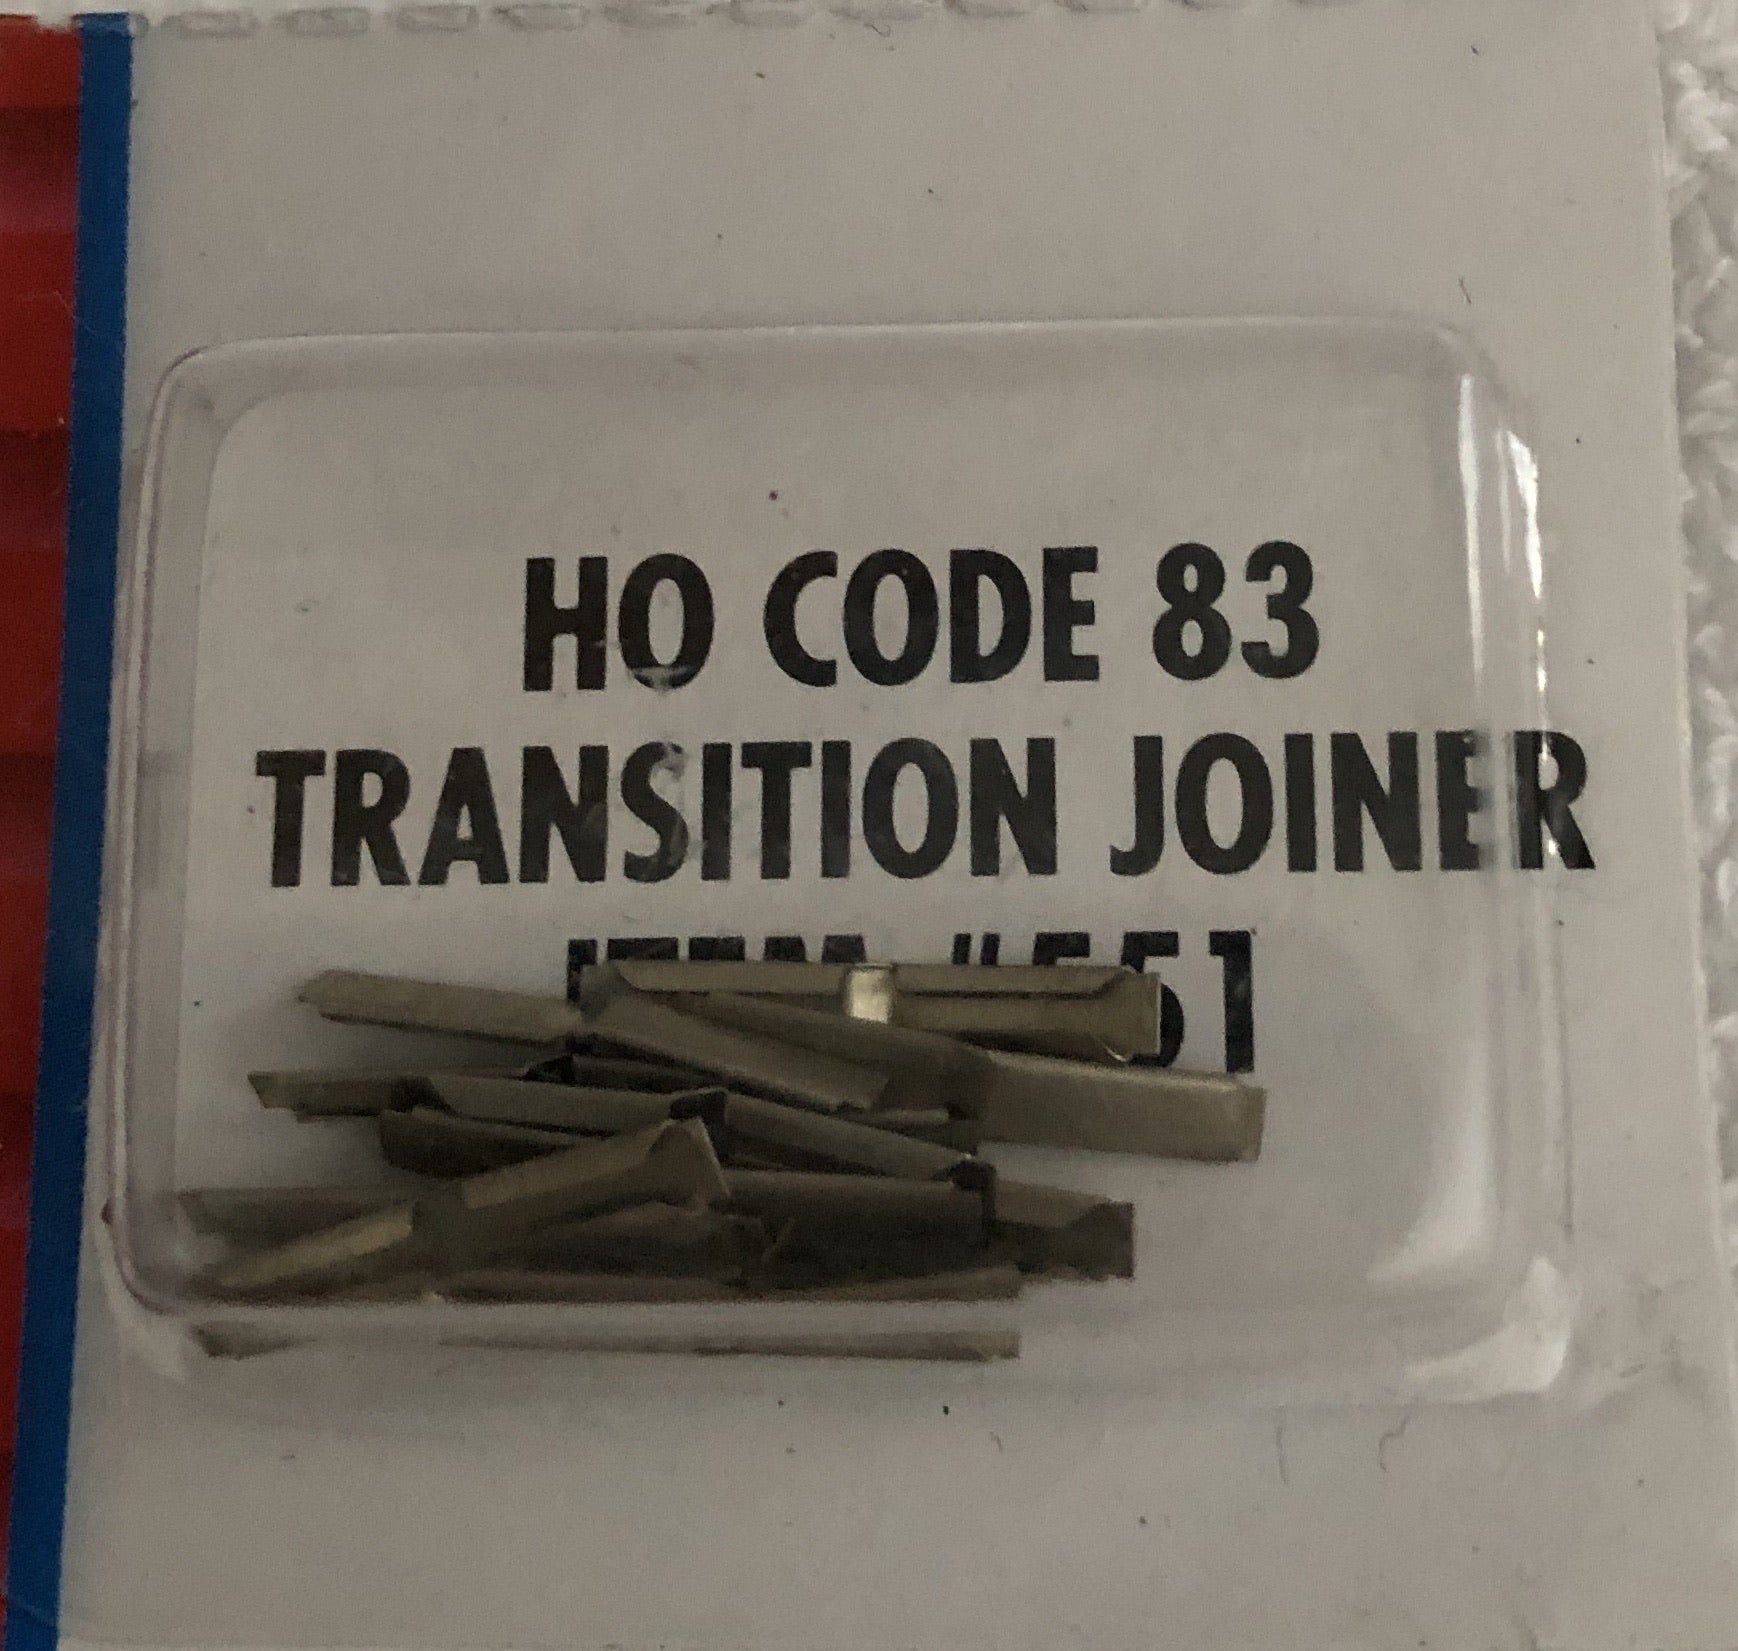  Atlas - CODE 83 Transition Rail Joiners for HO Scale Train Track